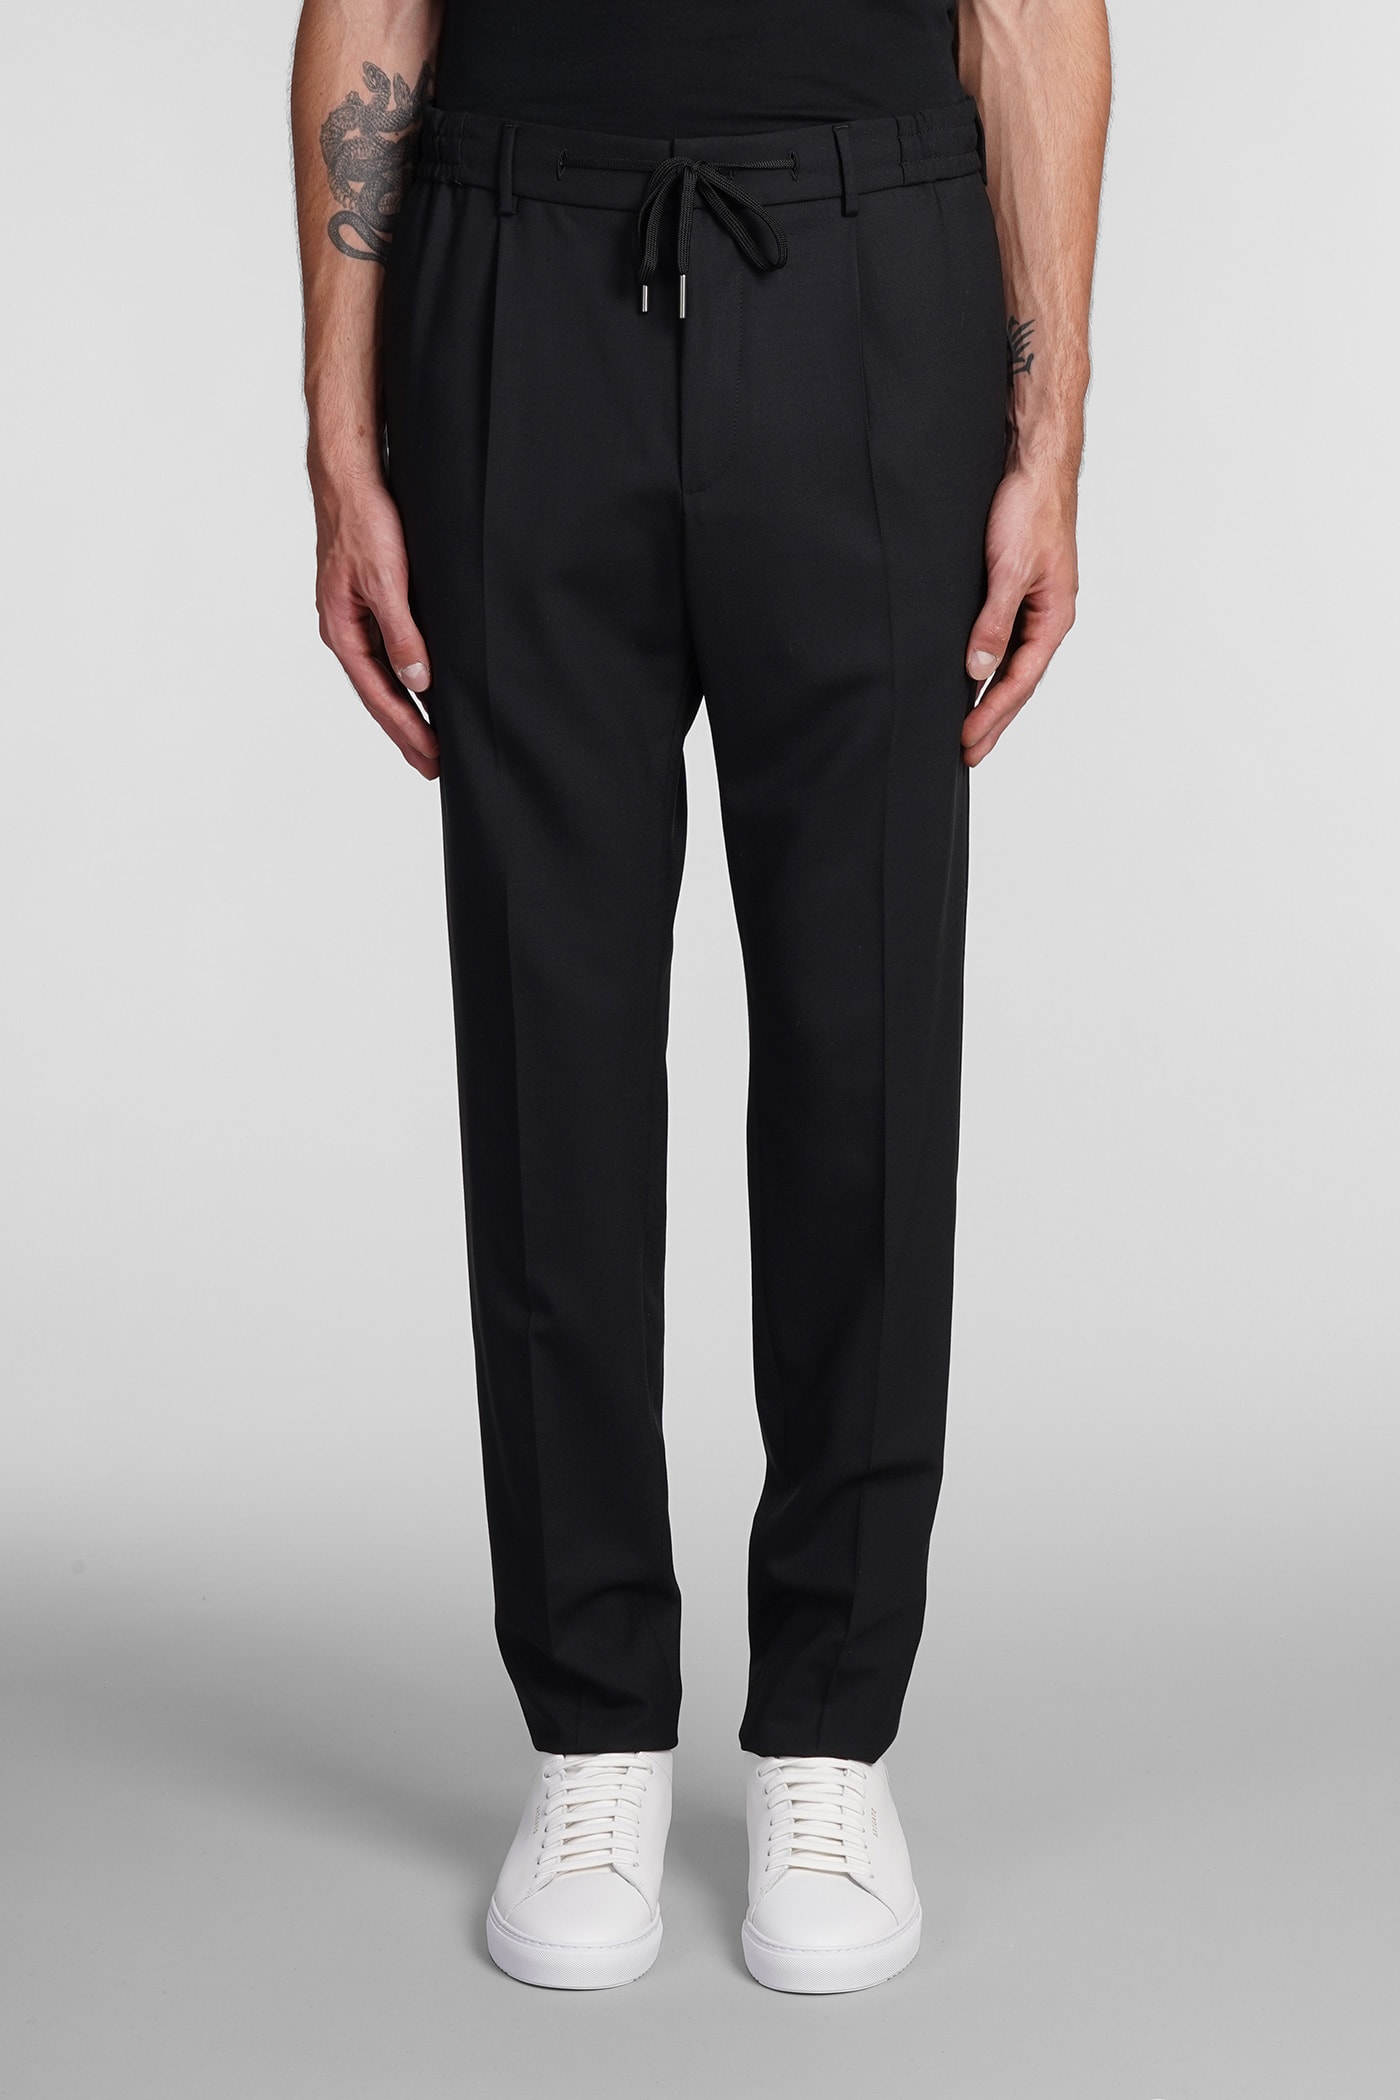 Tagliatore Pants In Black Polyester